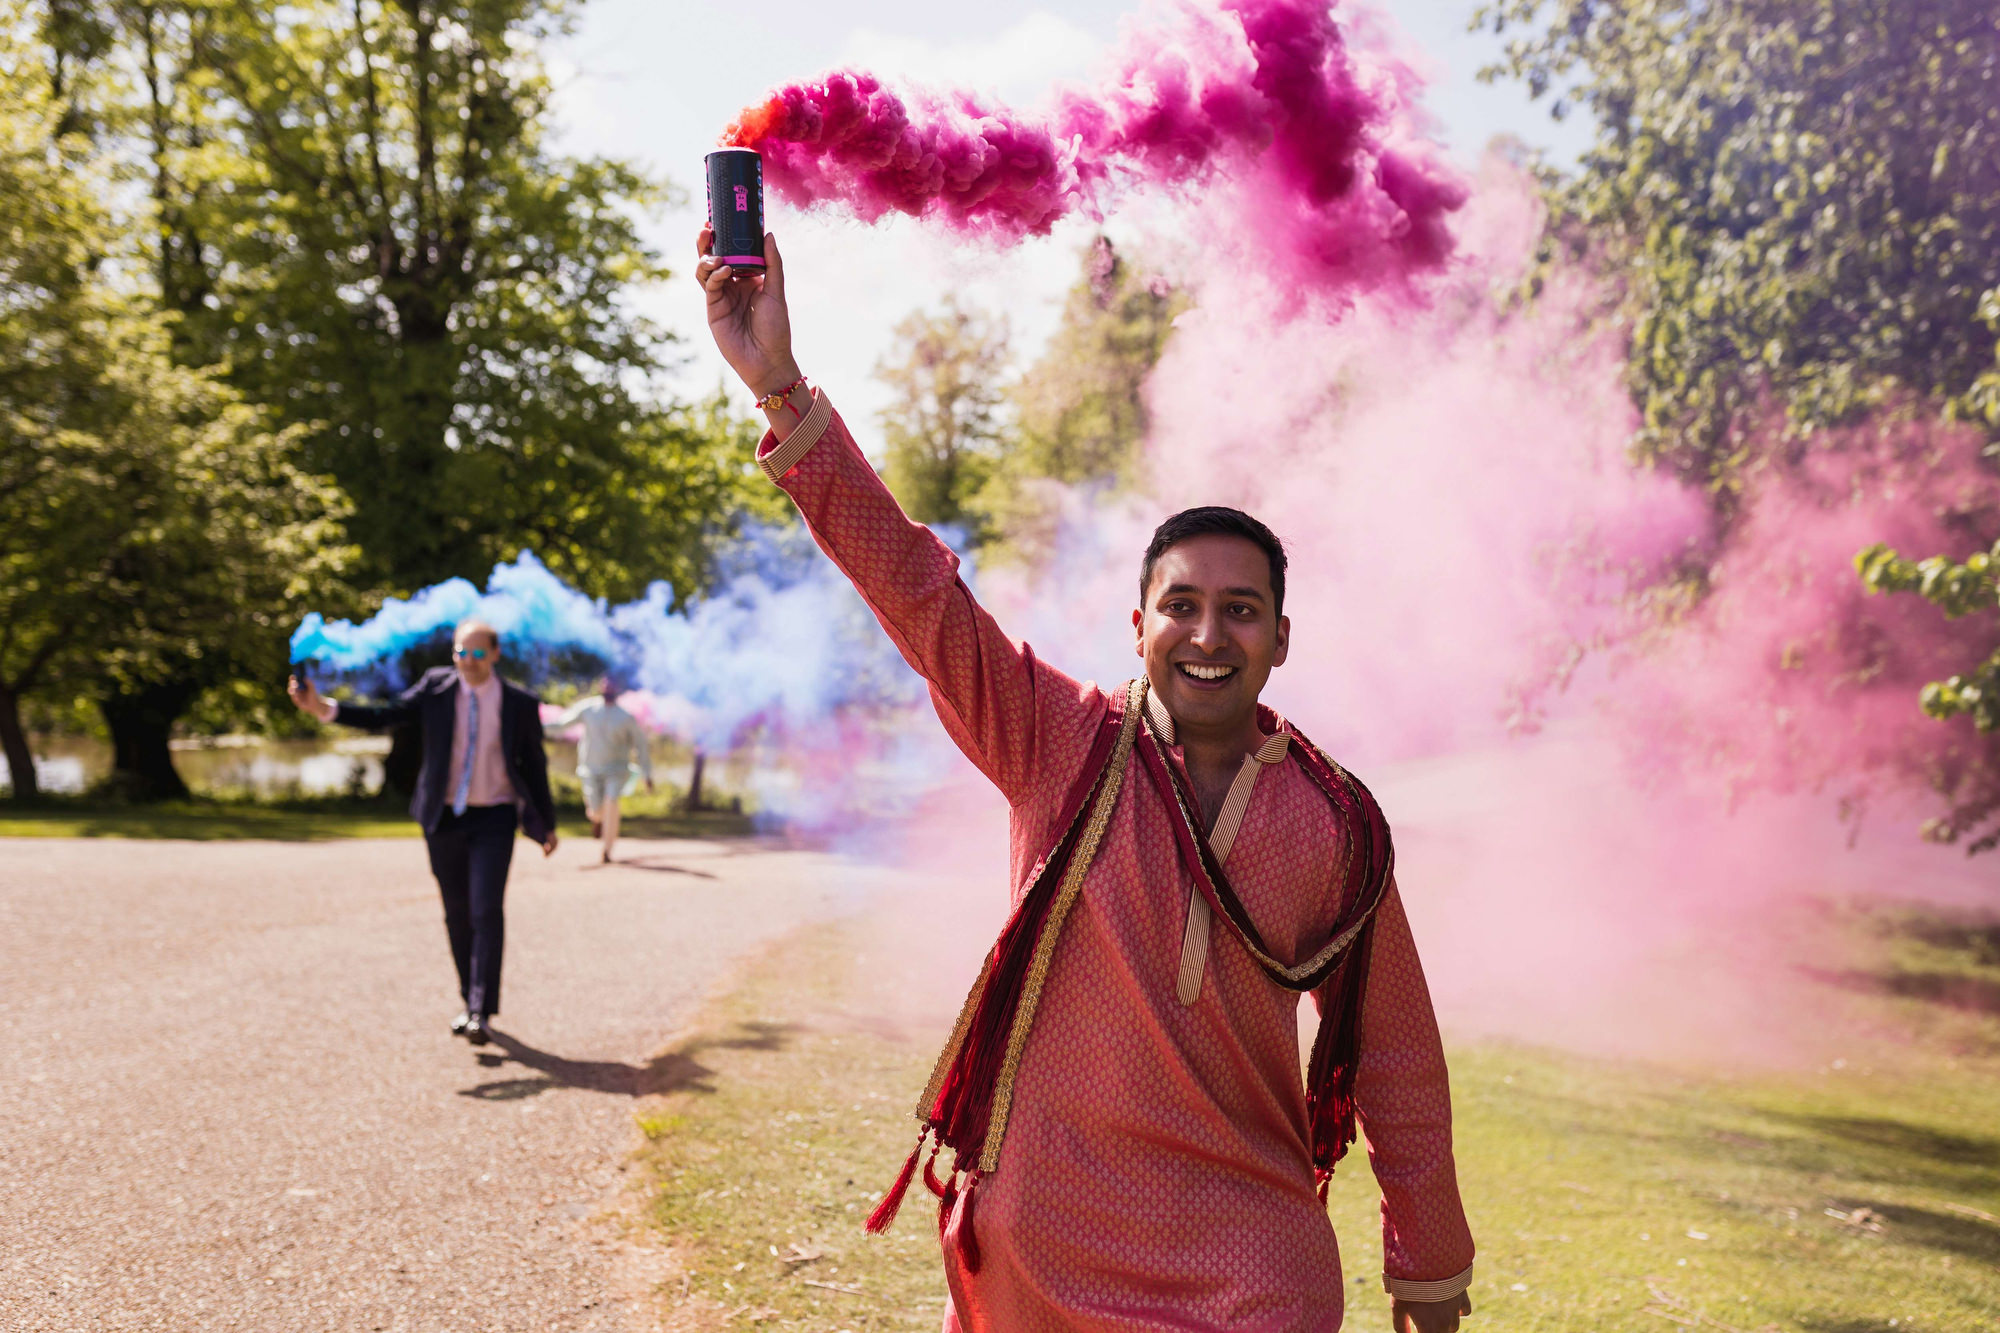 Asian Wedding Photographer in Essex, Braxted Park, Couples entrance, smoke grenades